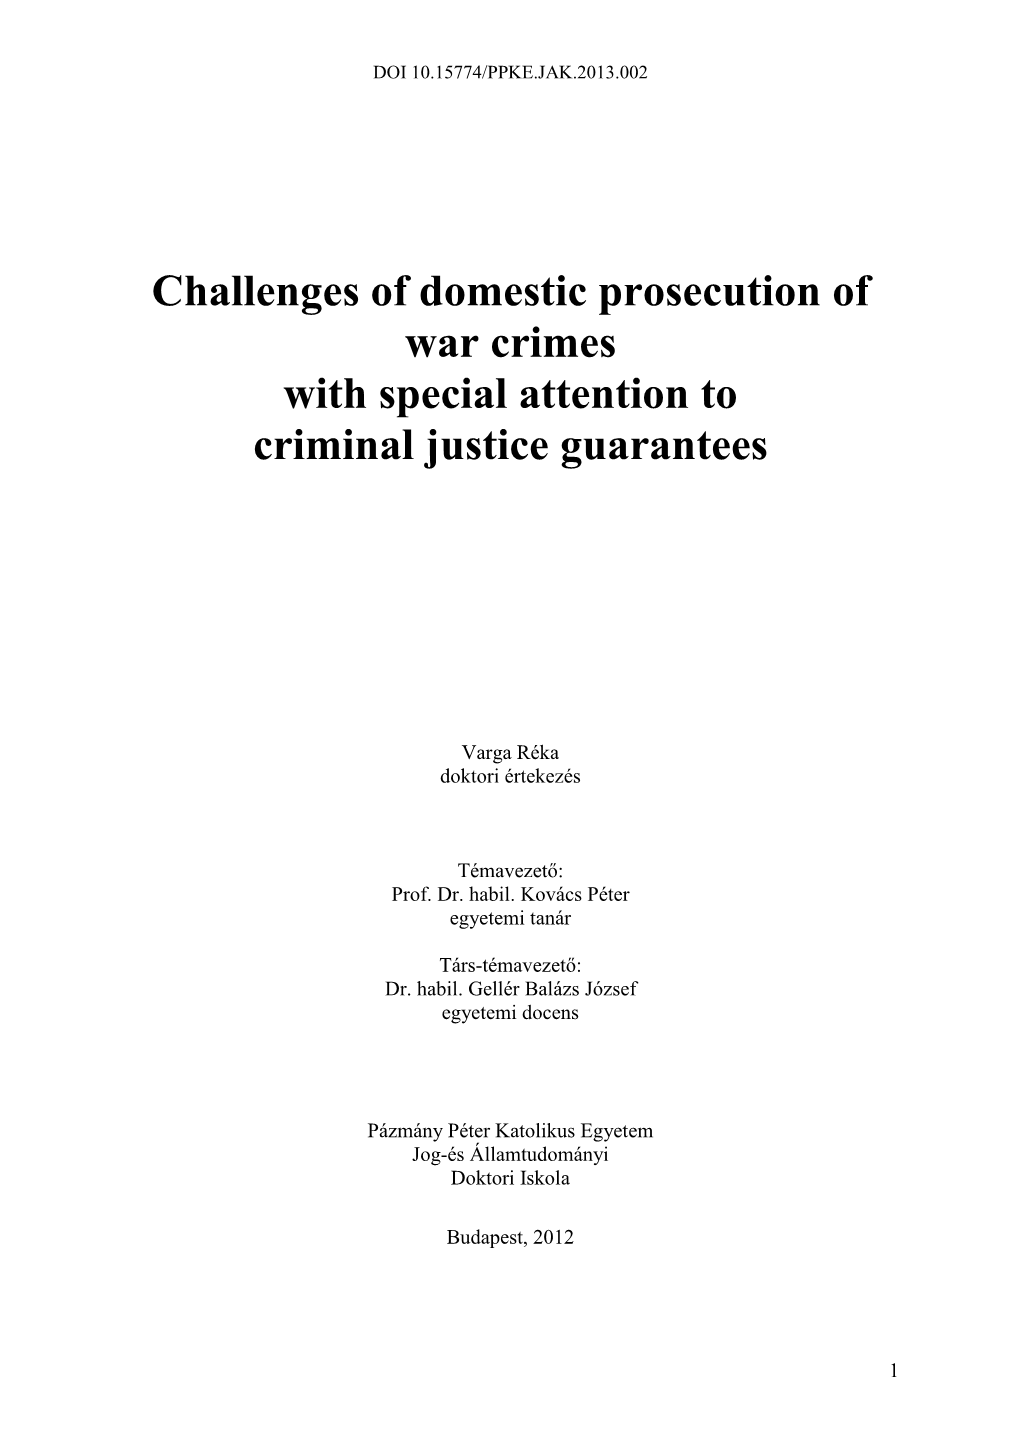 Challenges of Domestic Prosecution of War Crimes with Special Attention to Criminal Justice Guarantees